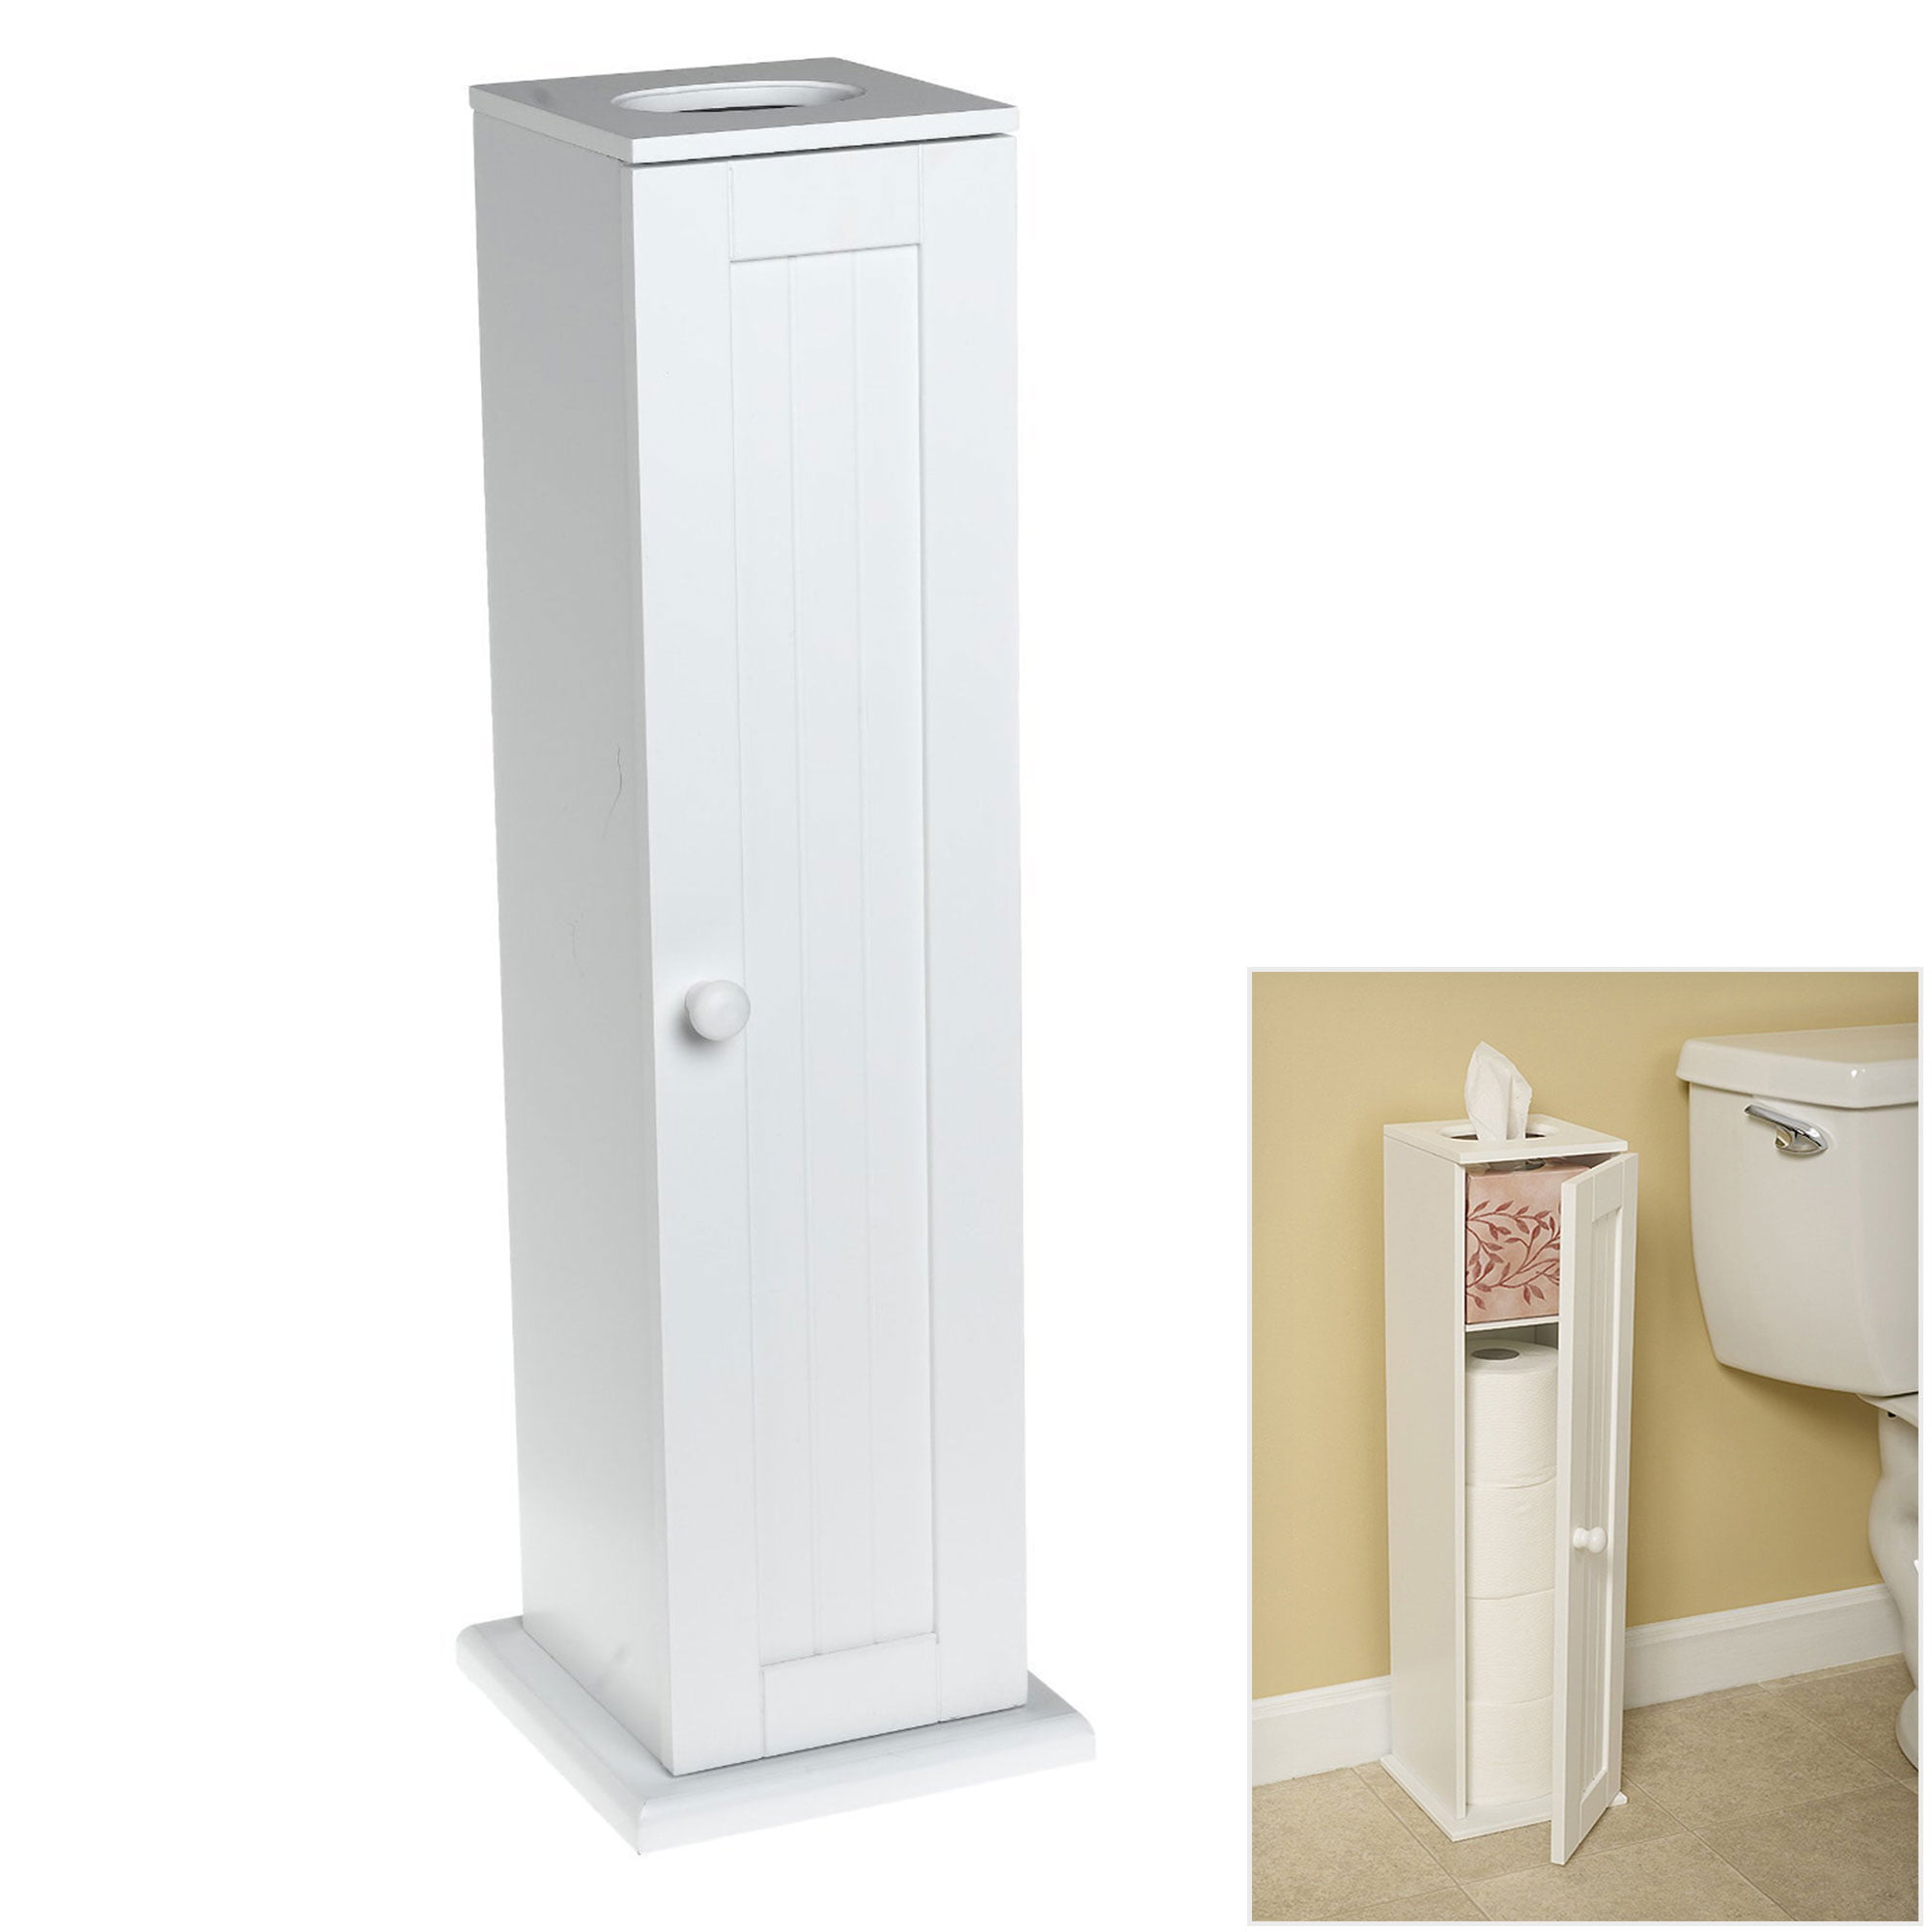 Country Cottage White Toilet Paper, Toilet Paper Cabinet Storage